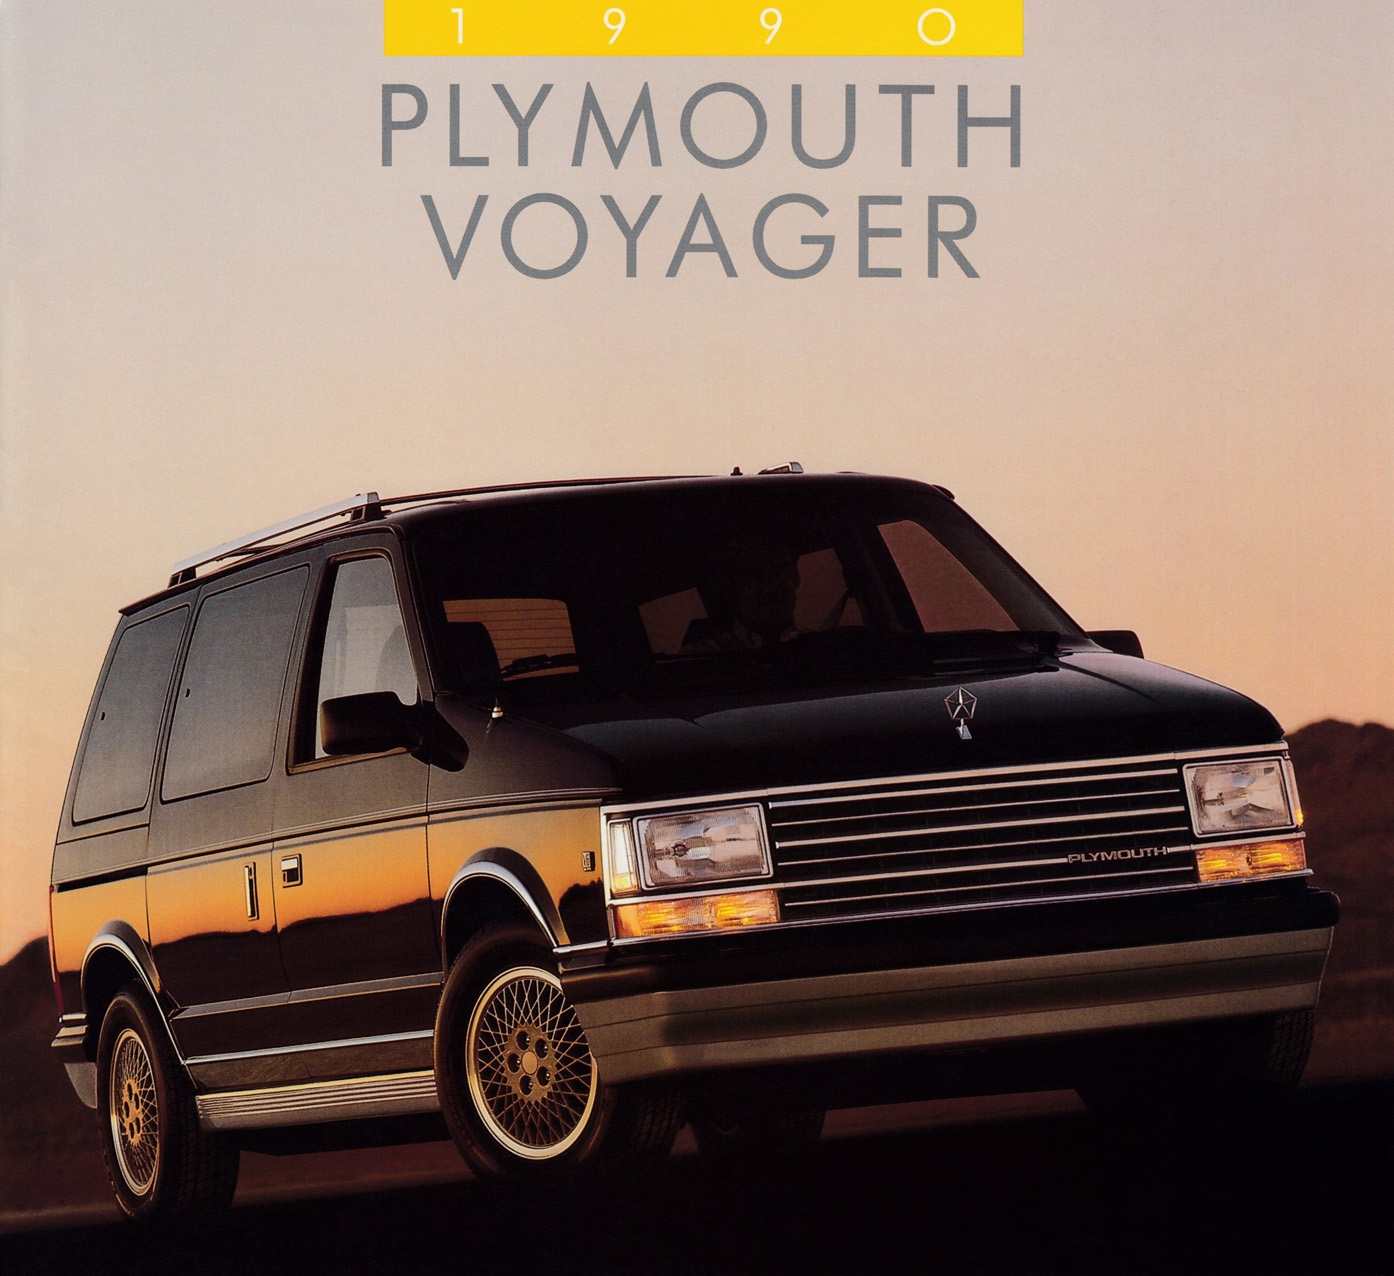 1990 Plymouth Voyager Brochure 01